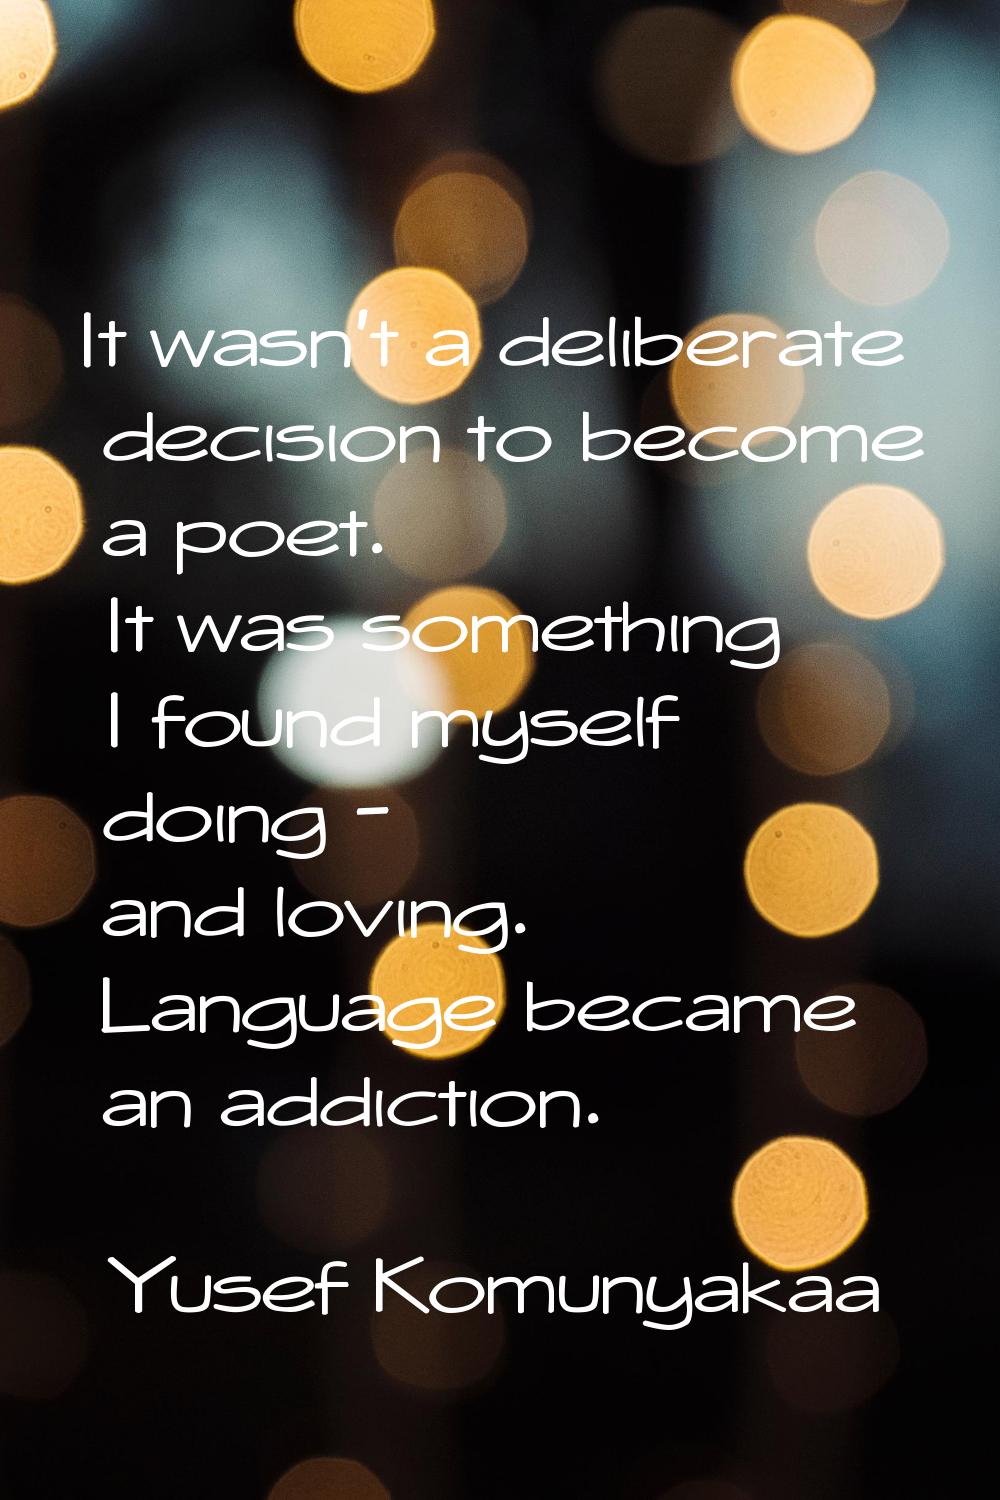 It wasn't a deliberate decision to become a poet. It was something I found myself doing - and lovin